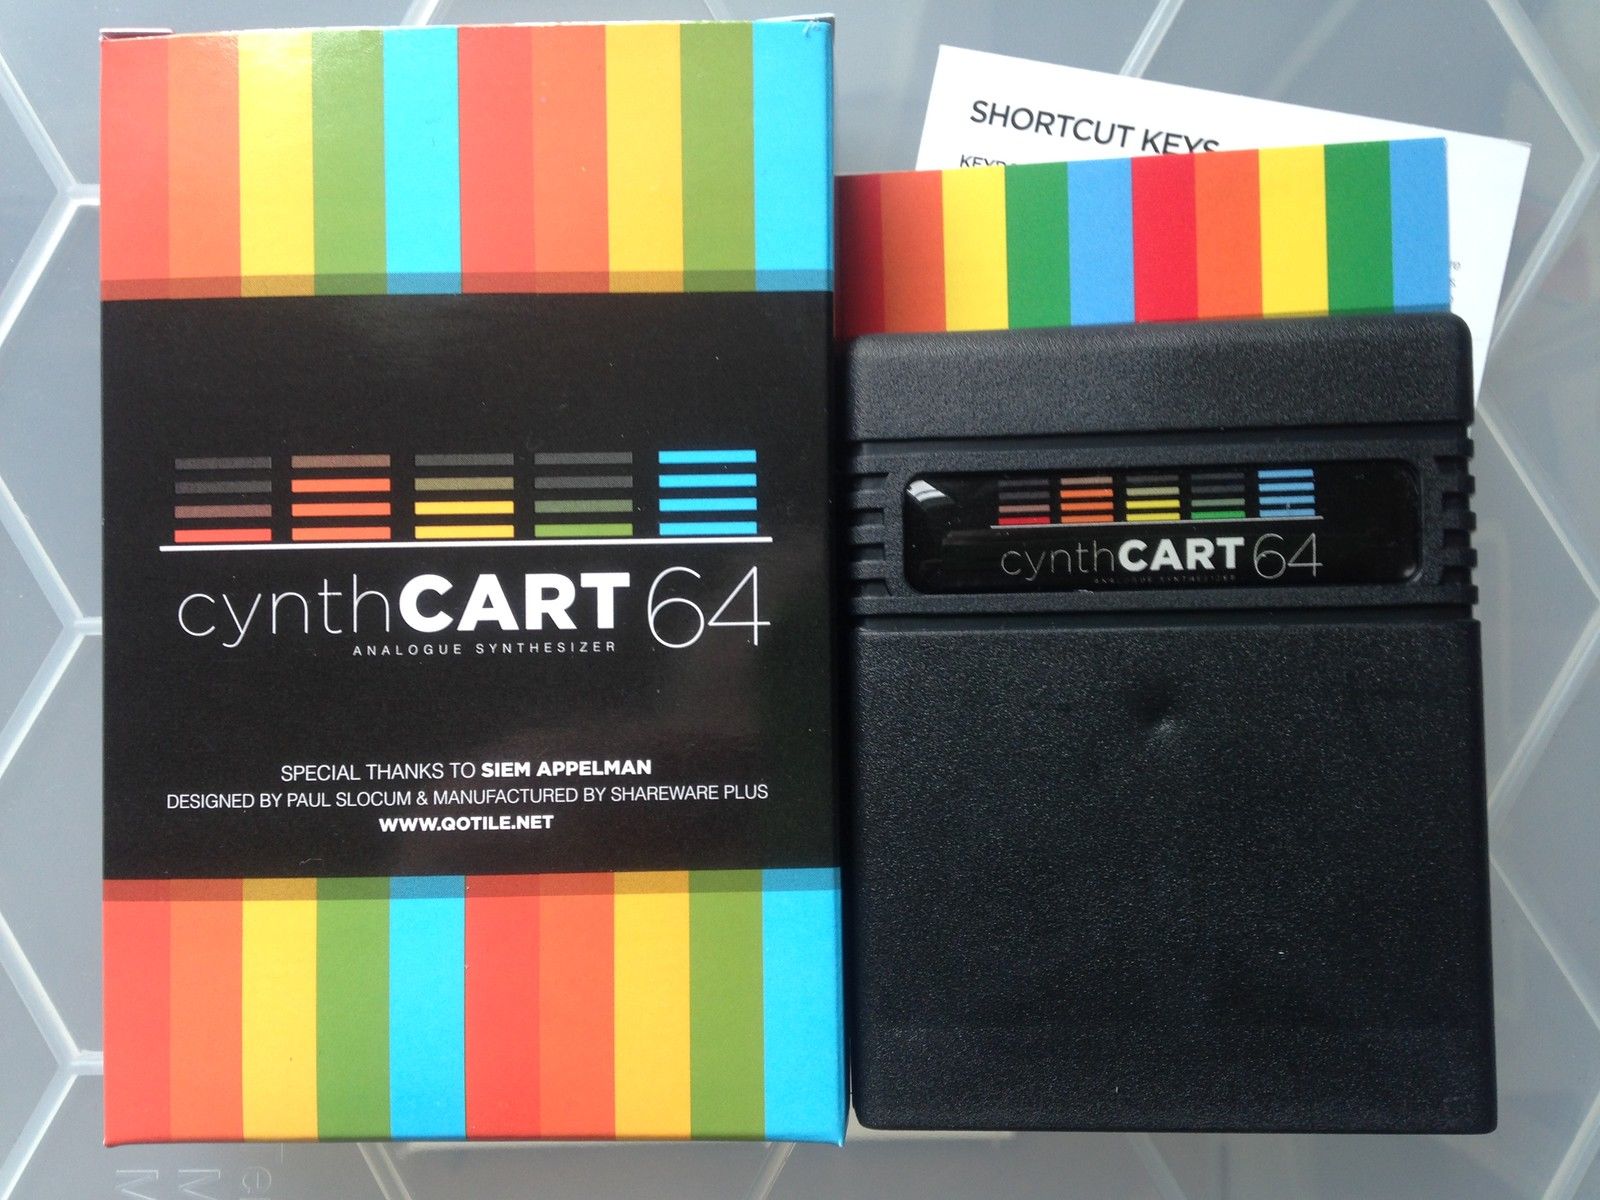 cynth-1 cynthCART 64 v2 Analogue Synthesizer with Midi Support for Commodore 64 - GameDude Computers